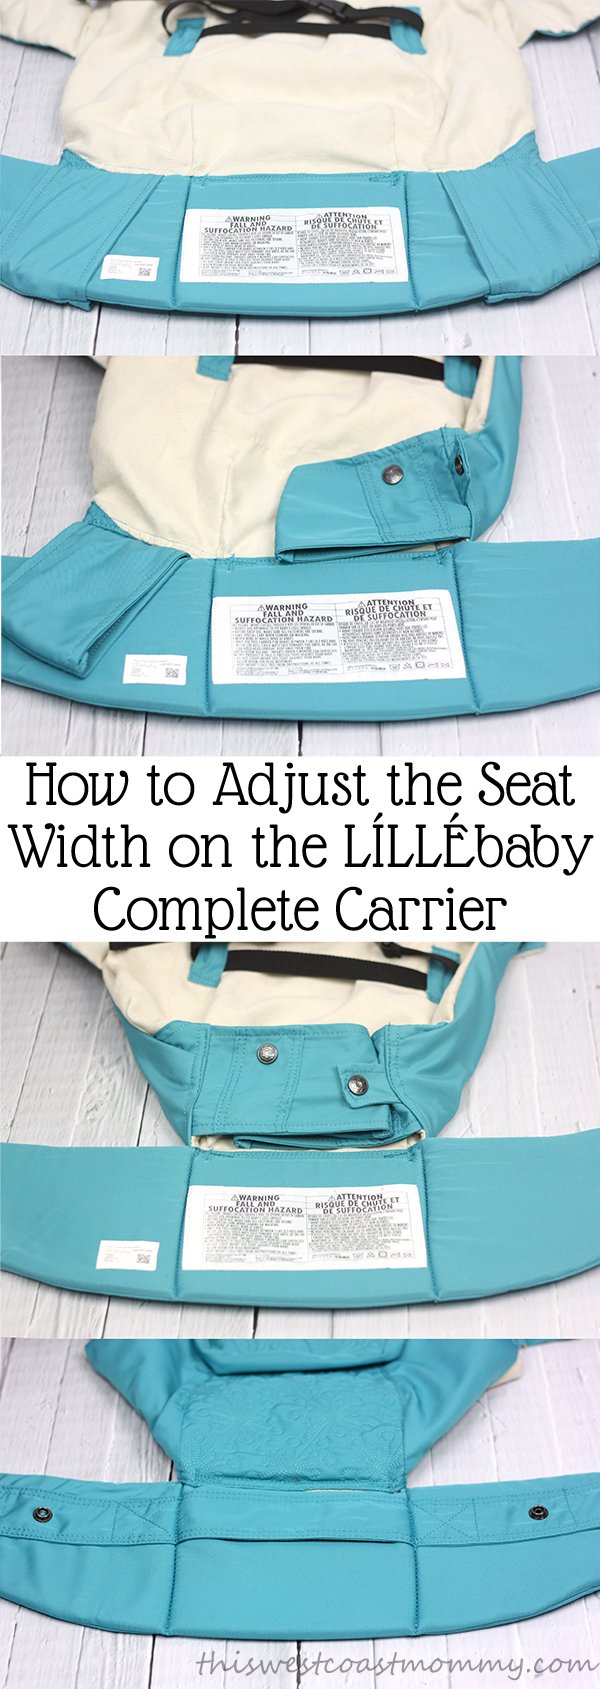 How to adjust the seat width on the LILLEbaby Complete Carrier